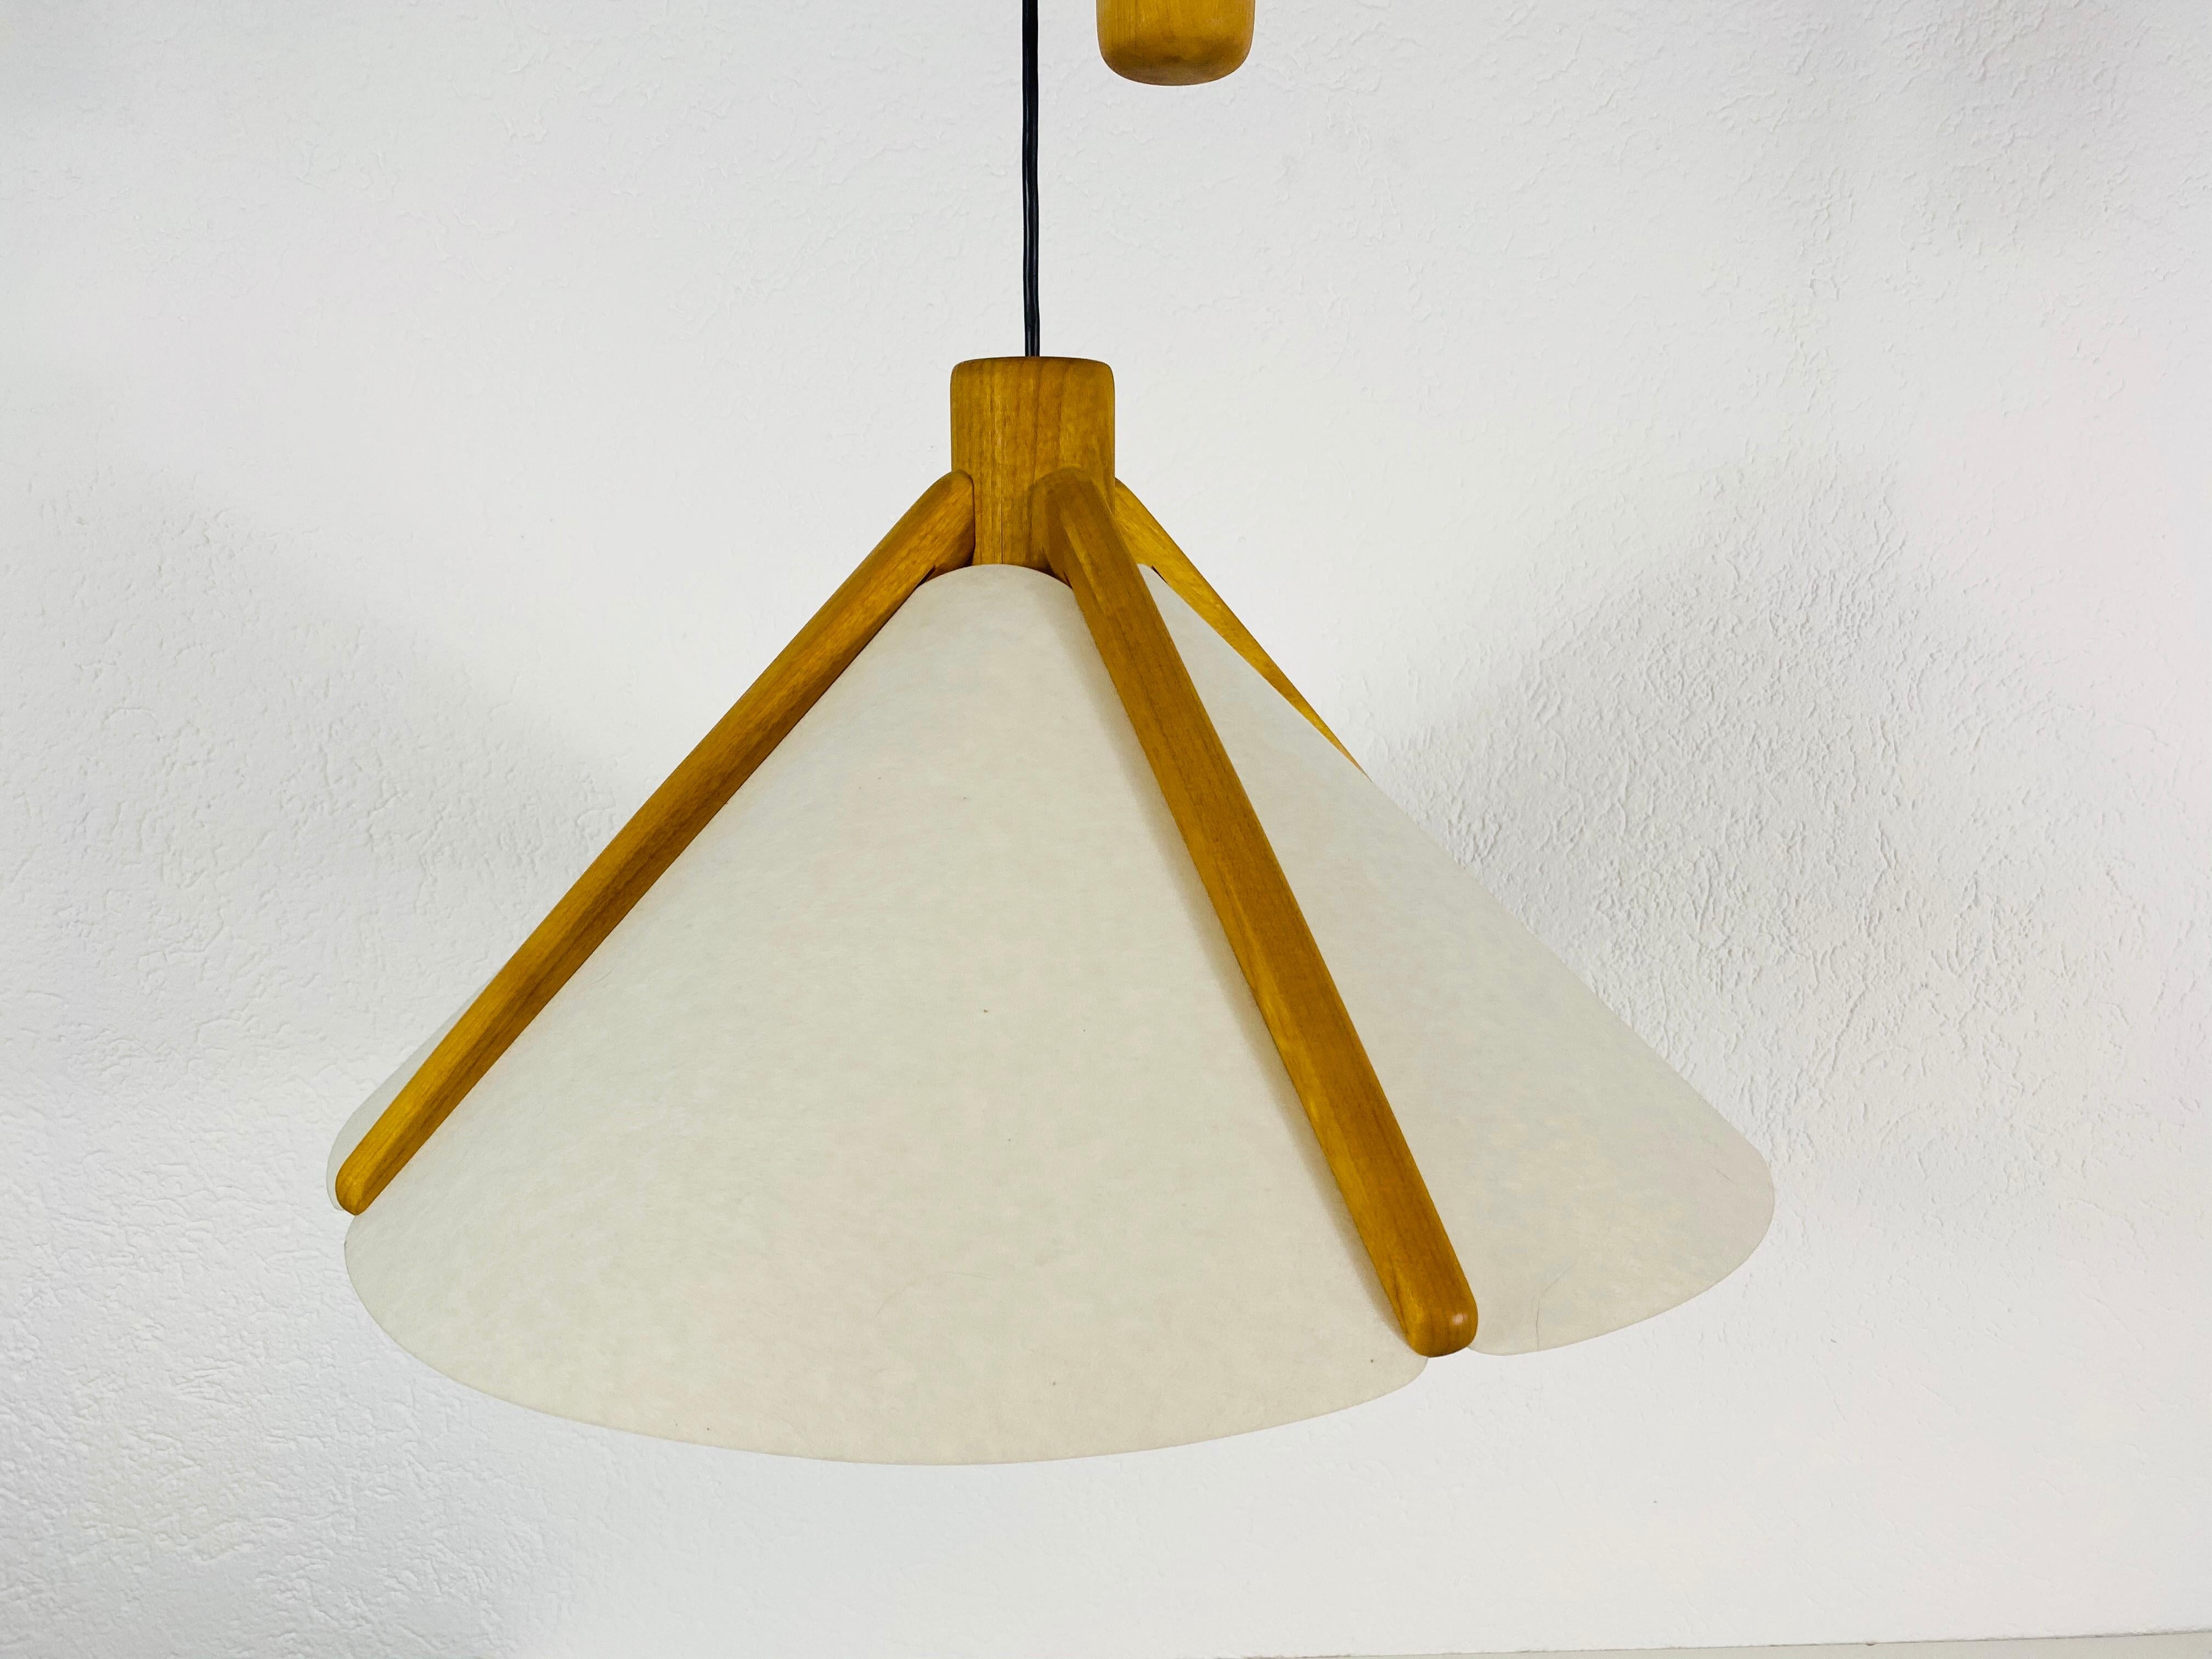 Textile Adjustable Midcentury Wooden Pendant Lamp with Counterweight by Domus, 1960s